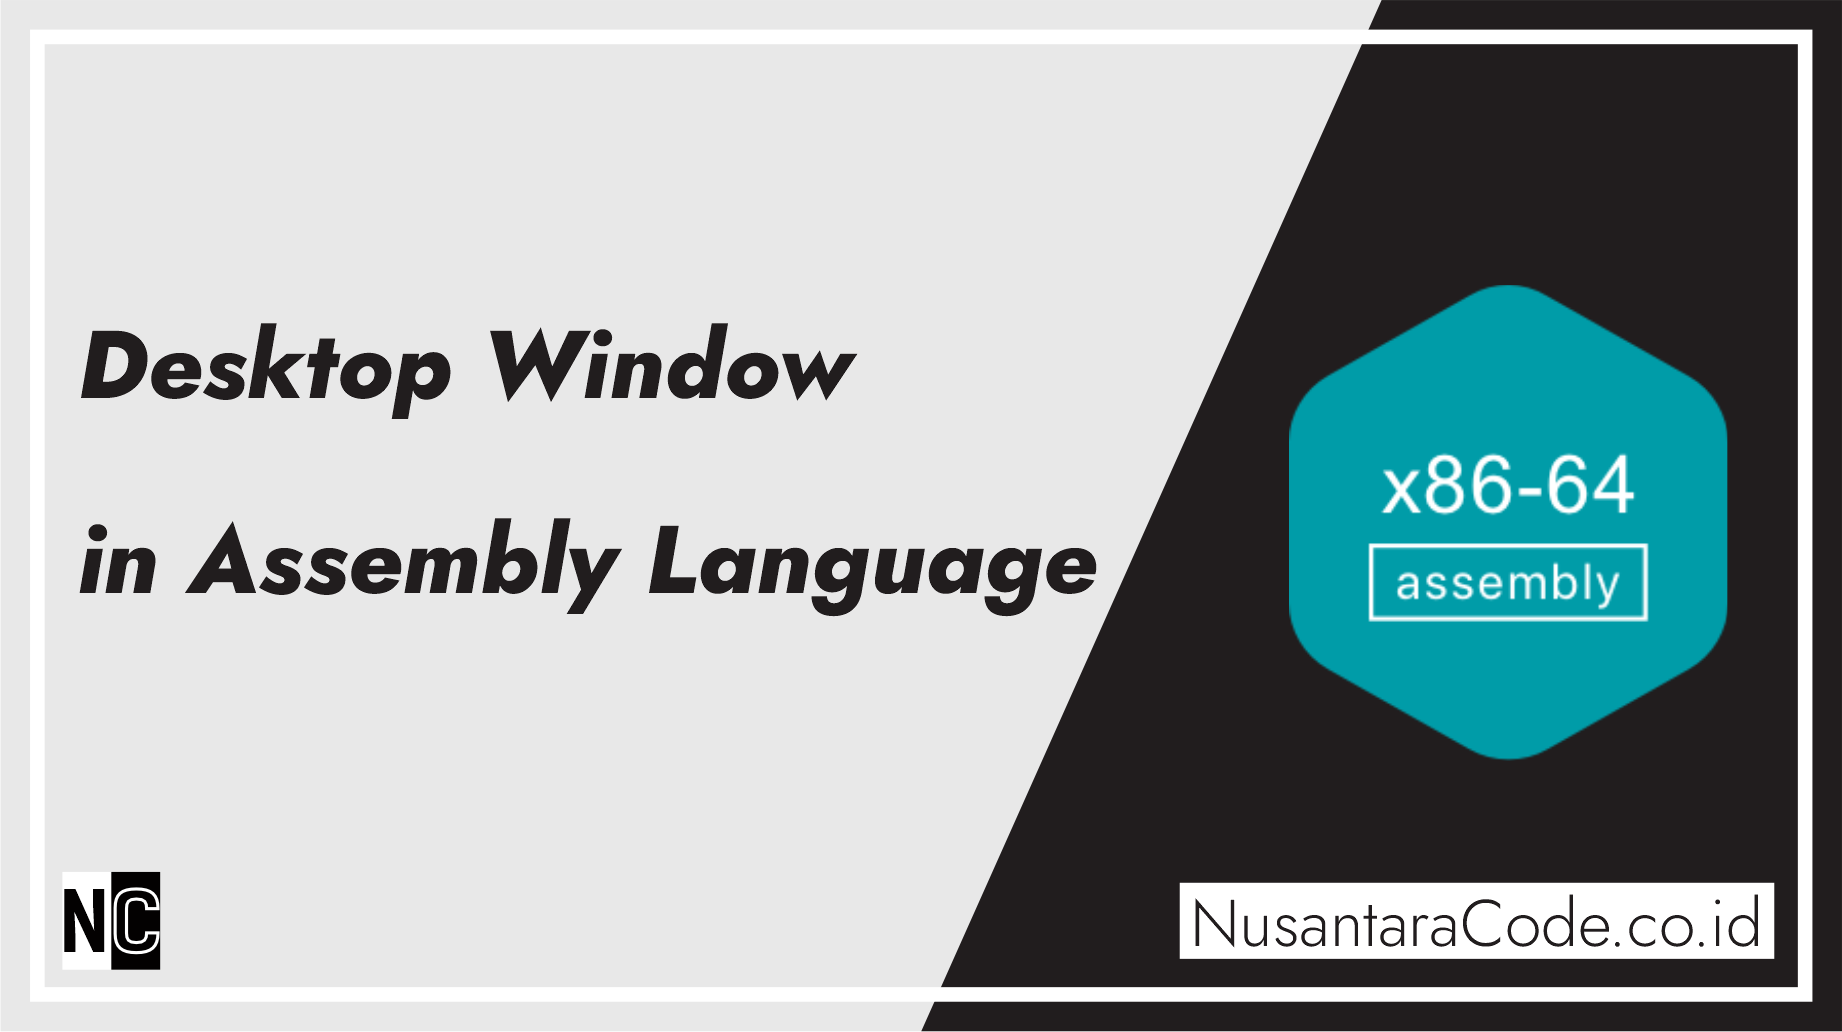 Building a Desktop Window in Assembly Language